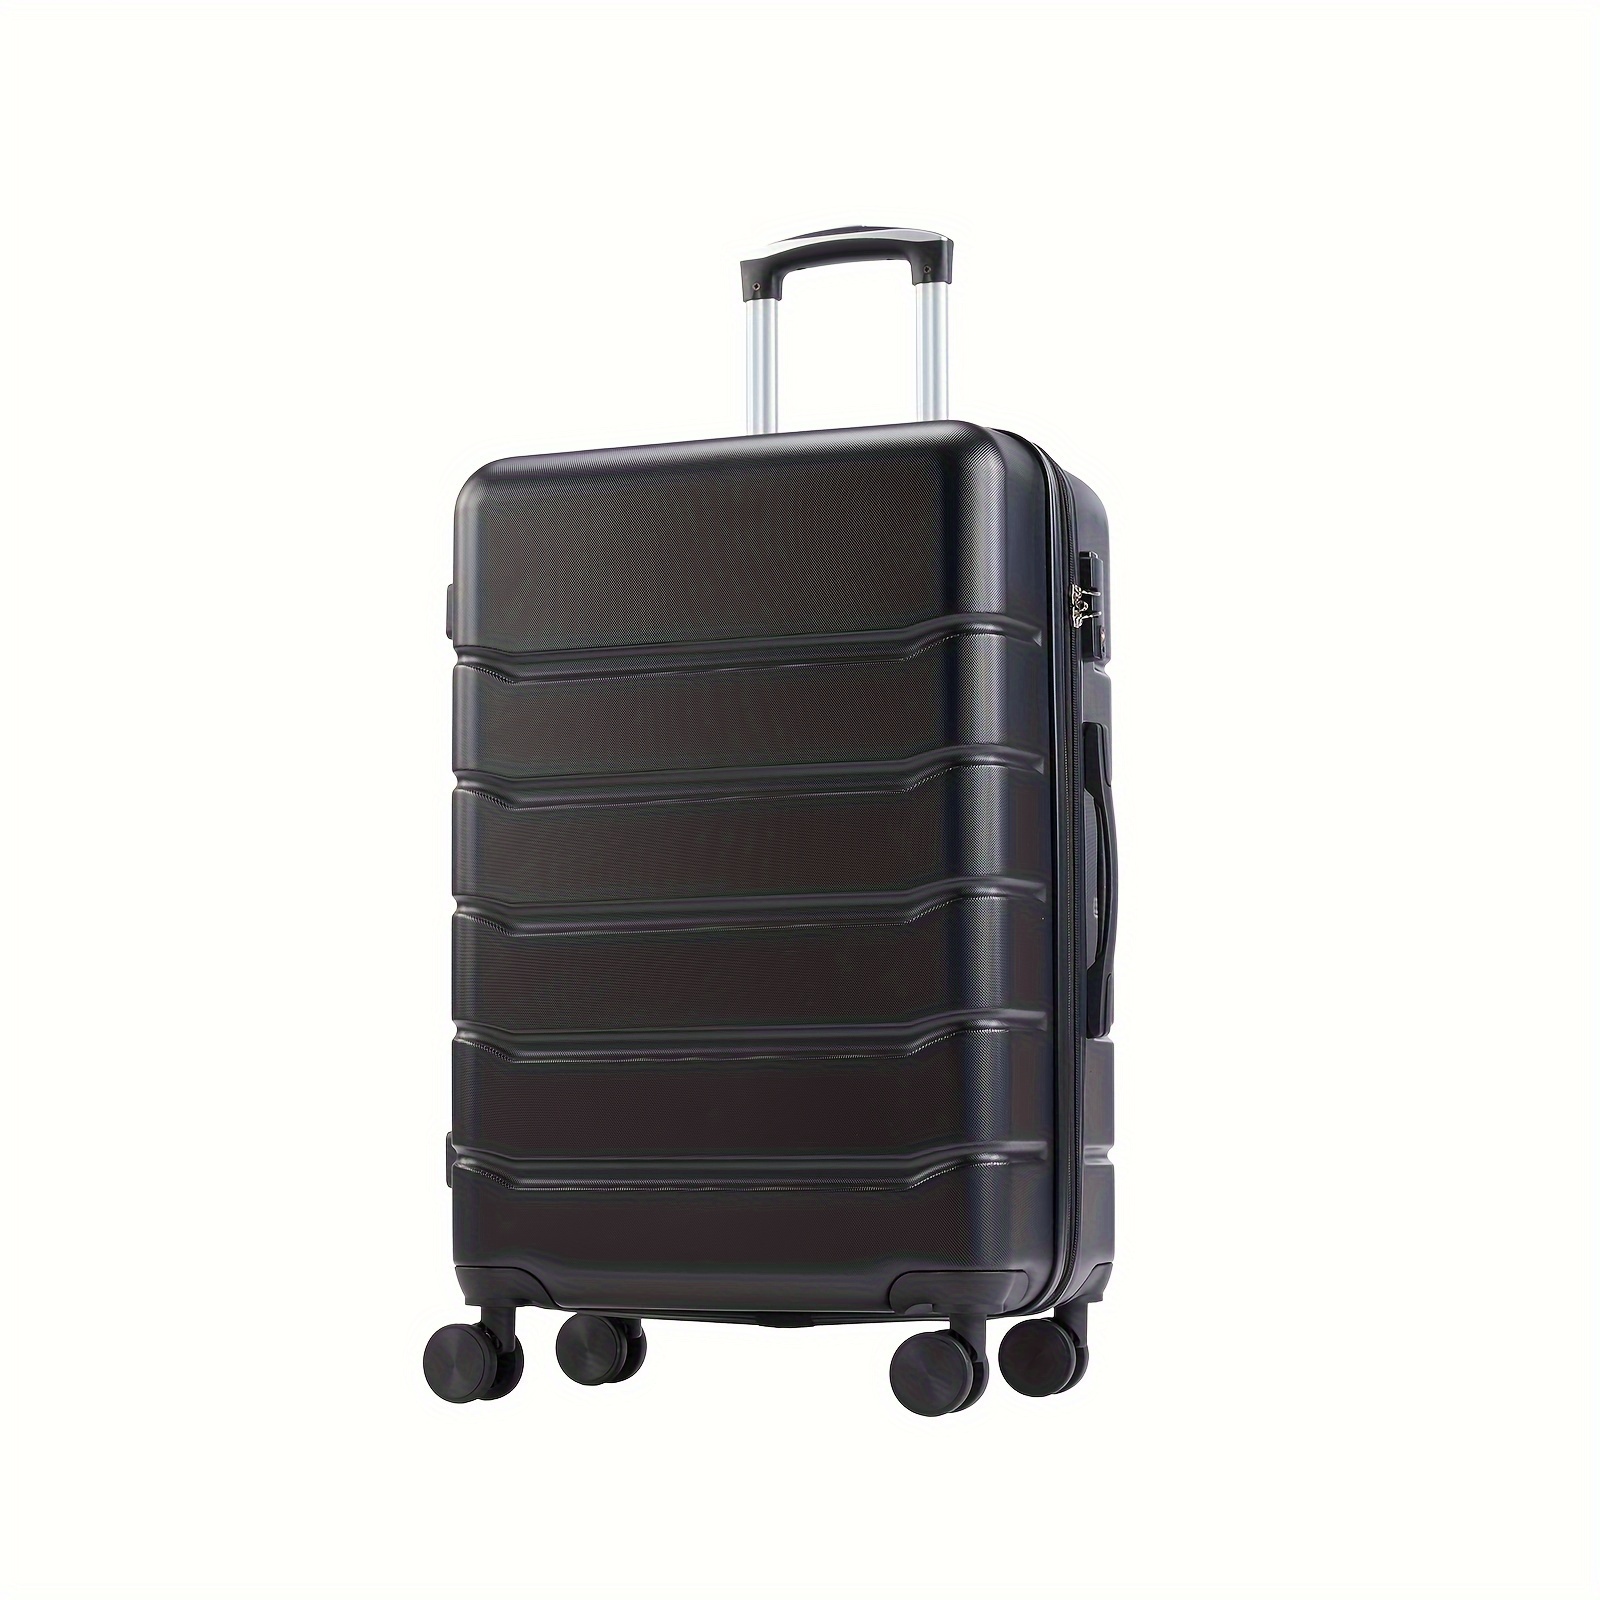 

Luggage, Expandable Hardside Suitcase, Hard Shell Abs Durable Lightweight Travel Luggage With Tsa Lock And Spinner Wheels